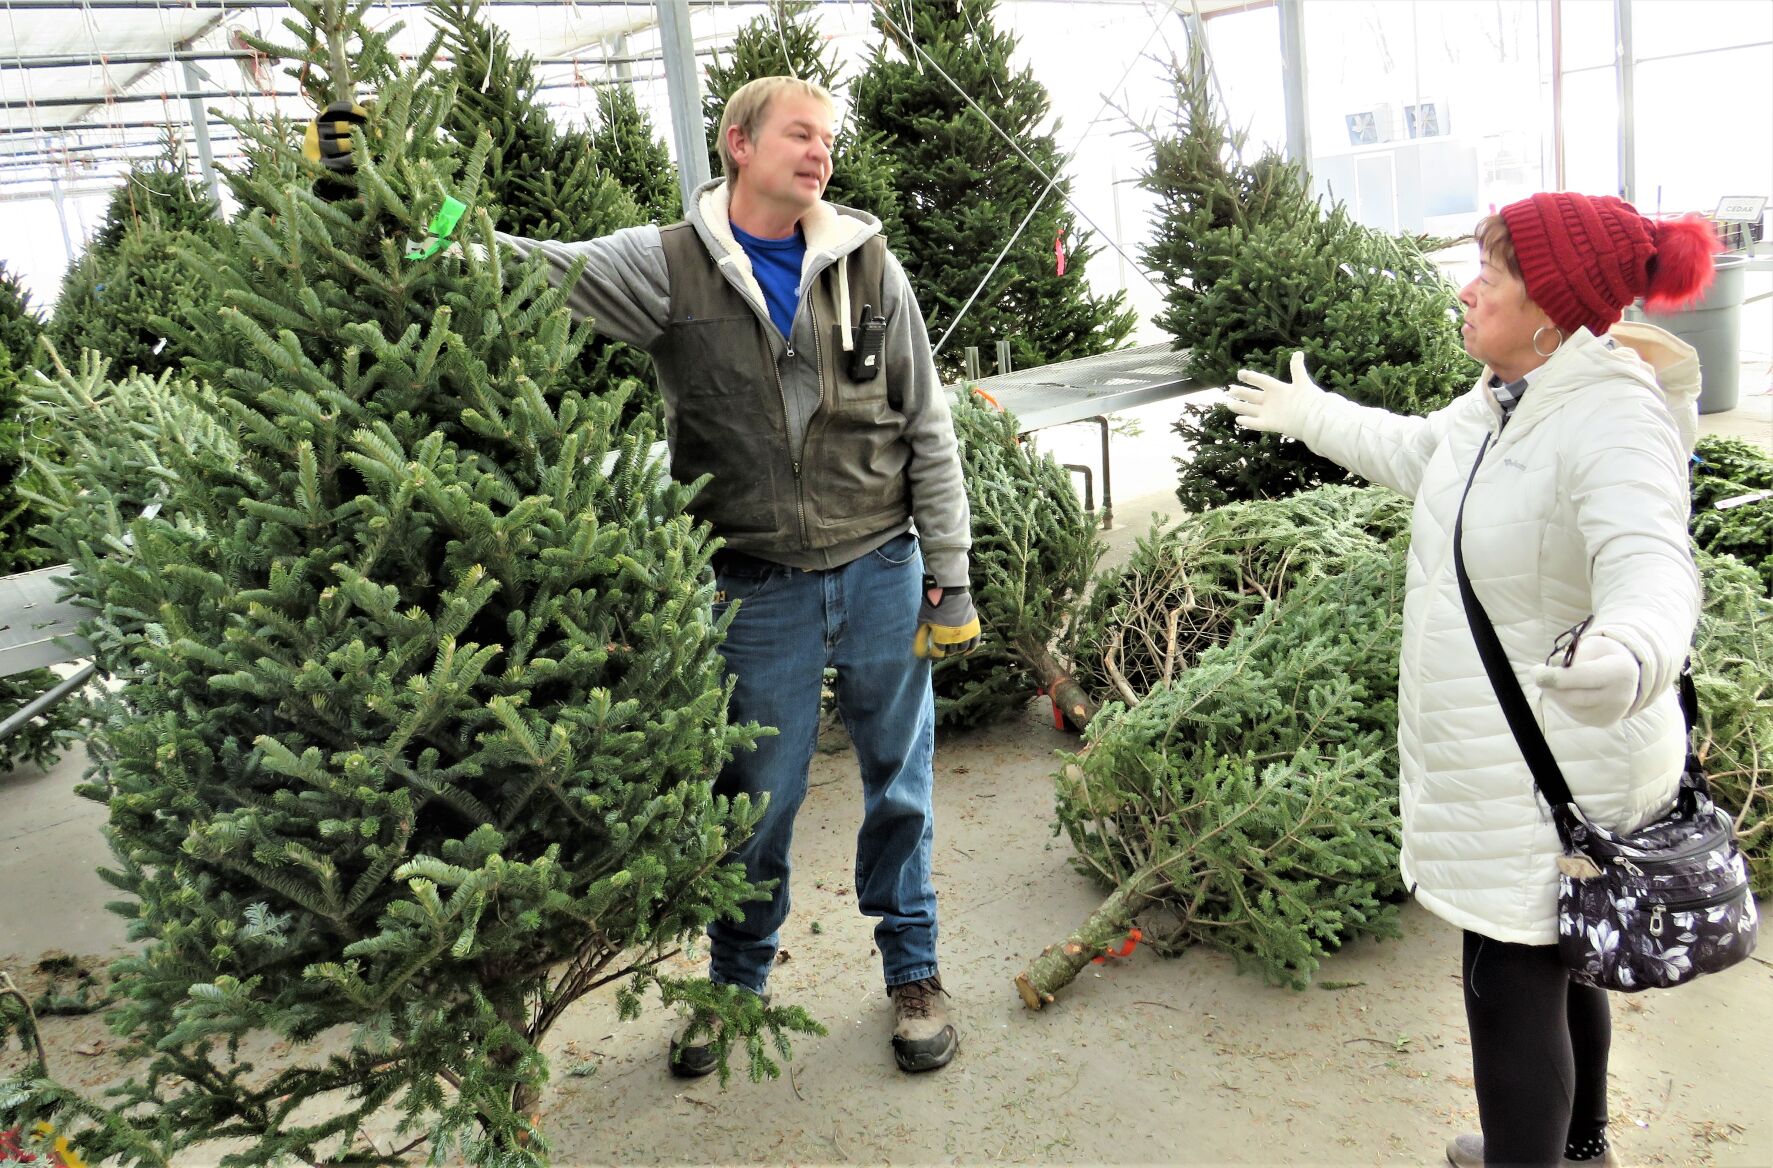 CHRISTMAS GREEN: Tree sales brisk, prices up some | Business